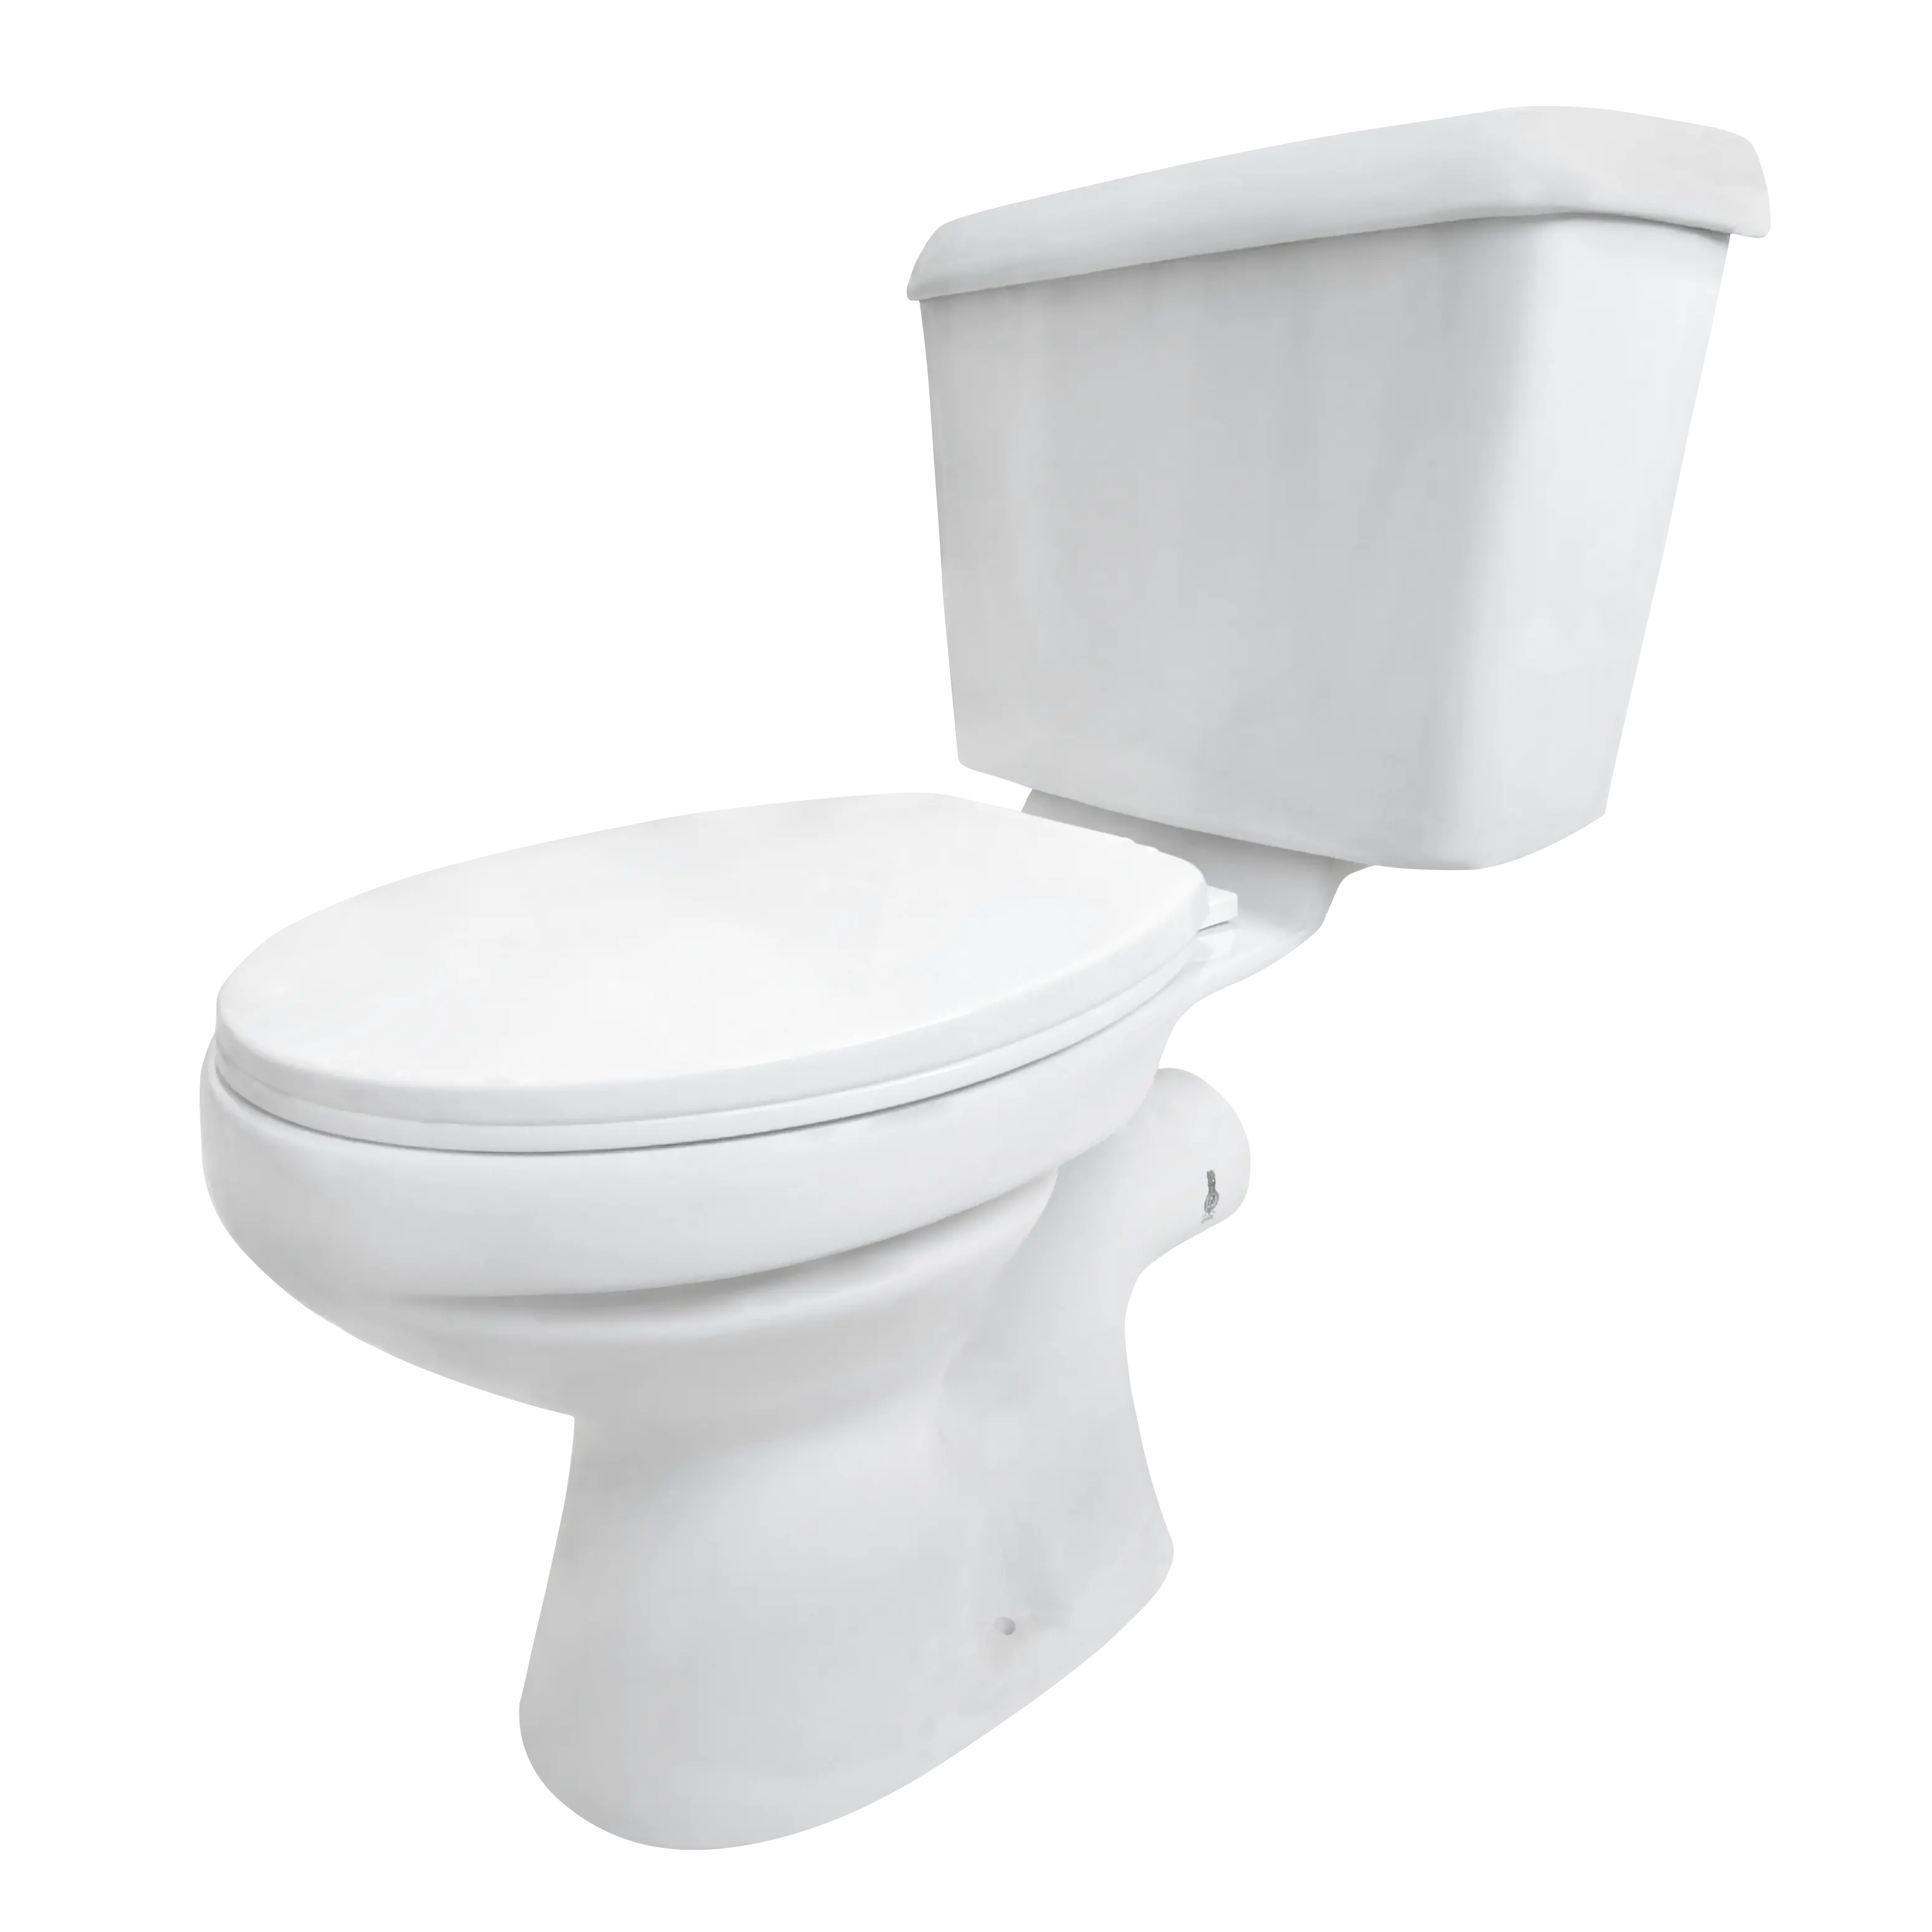 Goodone Commercial Low Level 2 Piece Elongated Water Closet White Toilet